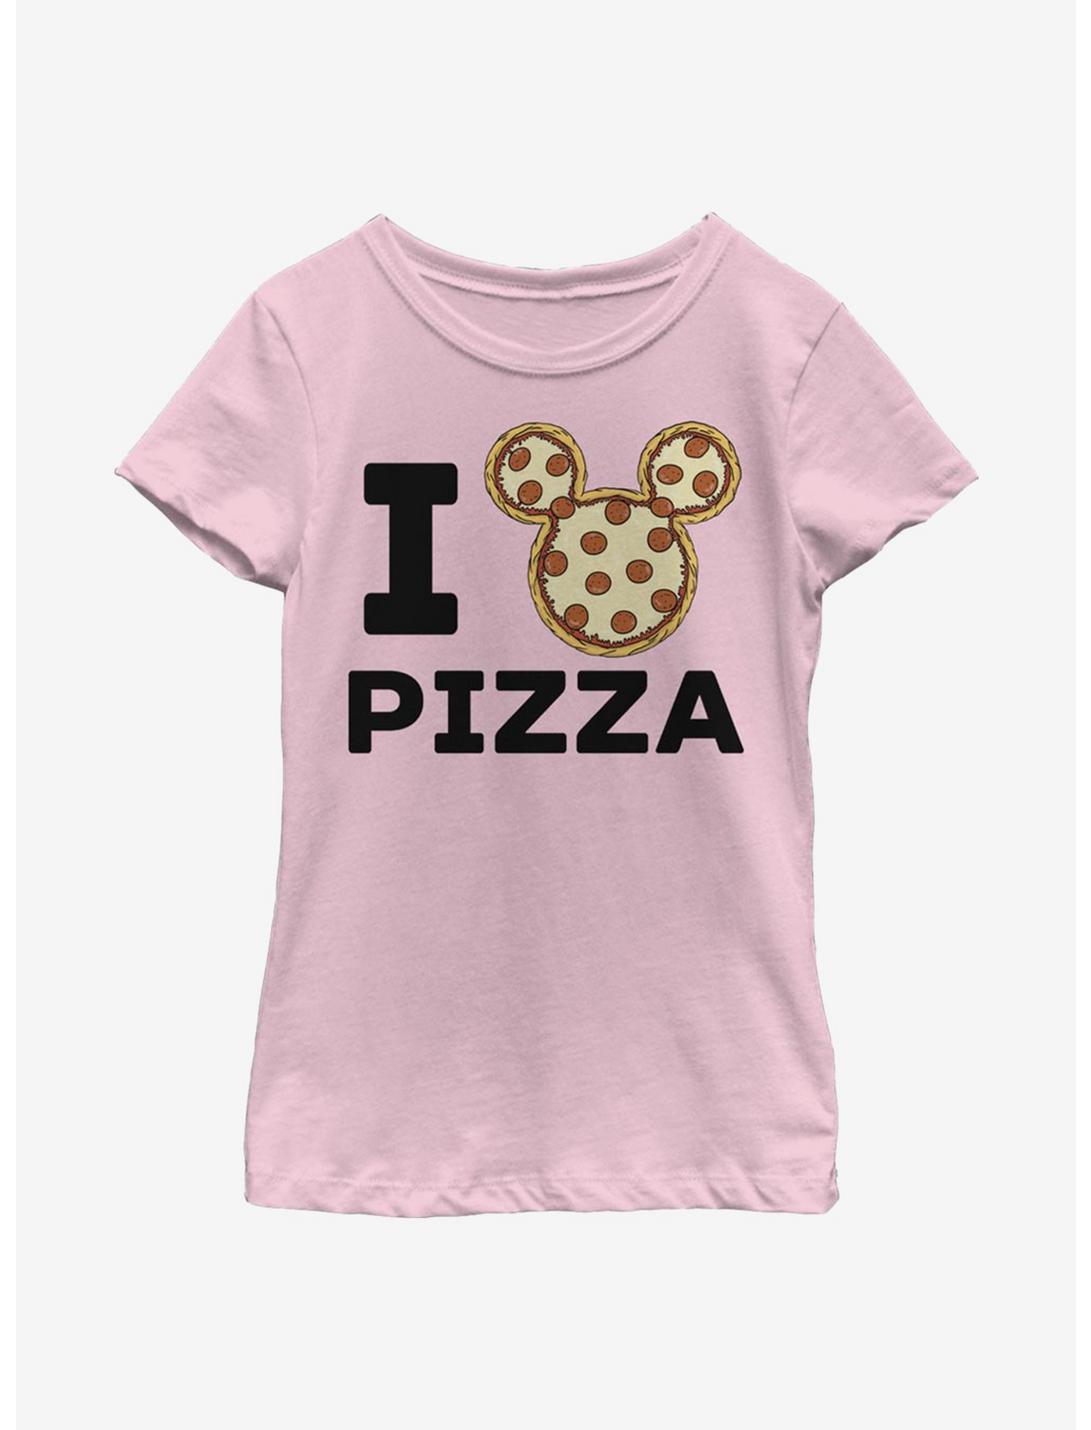 Disney Mickey Mouse Pizza Youth Girls T-Shirt, PINK, hi-res